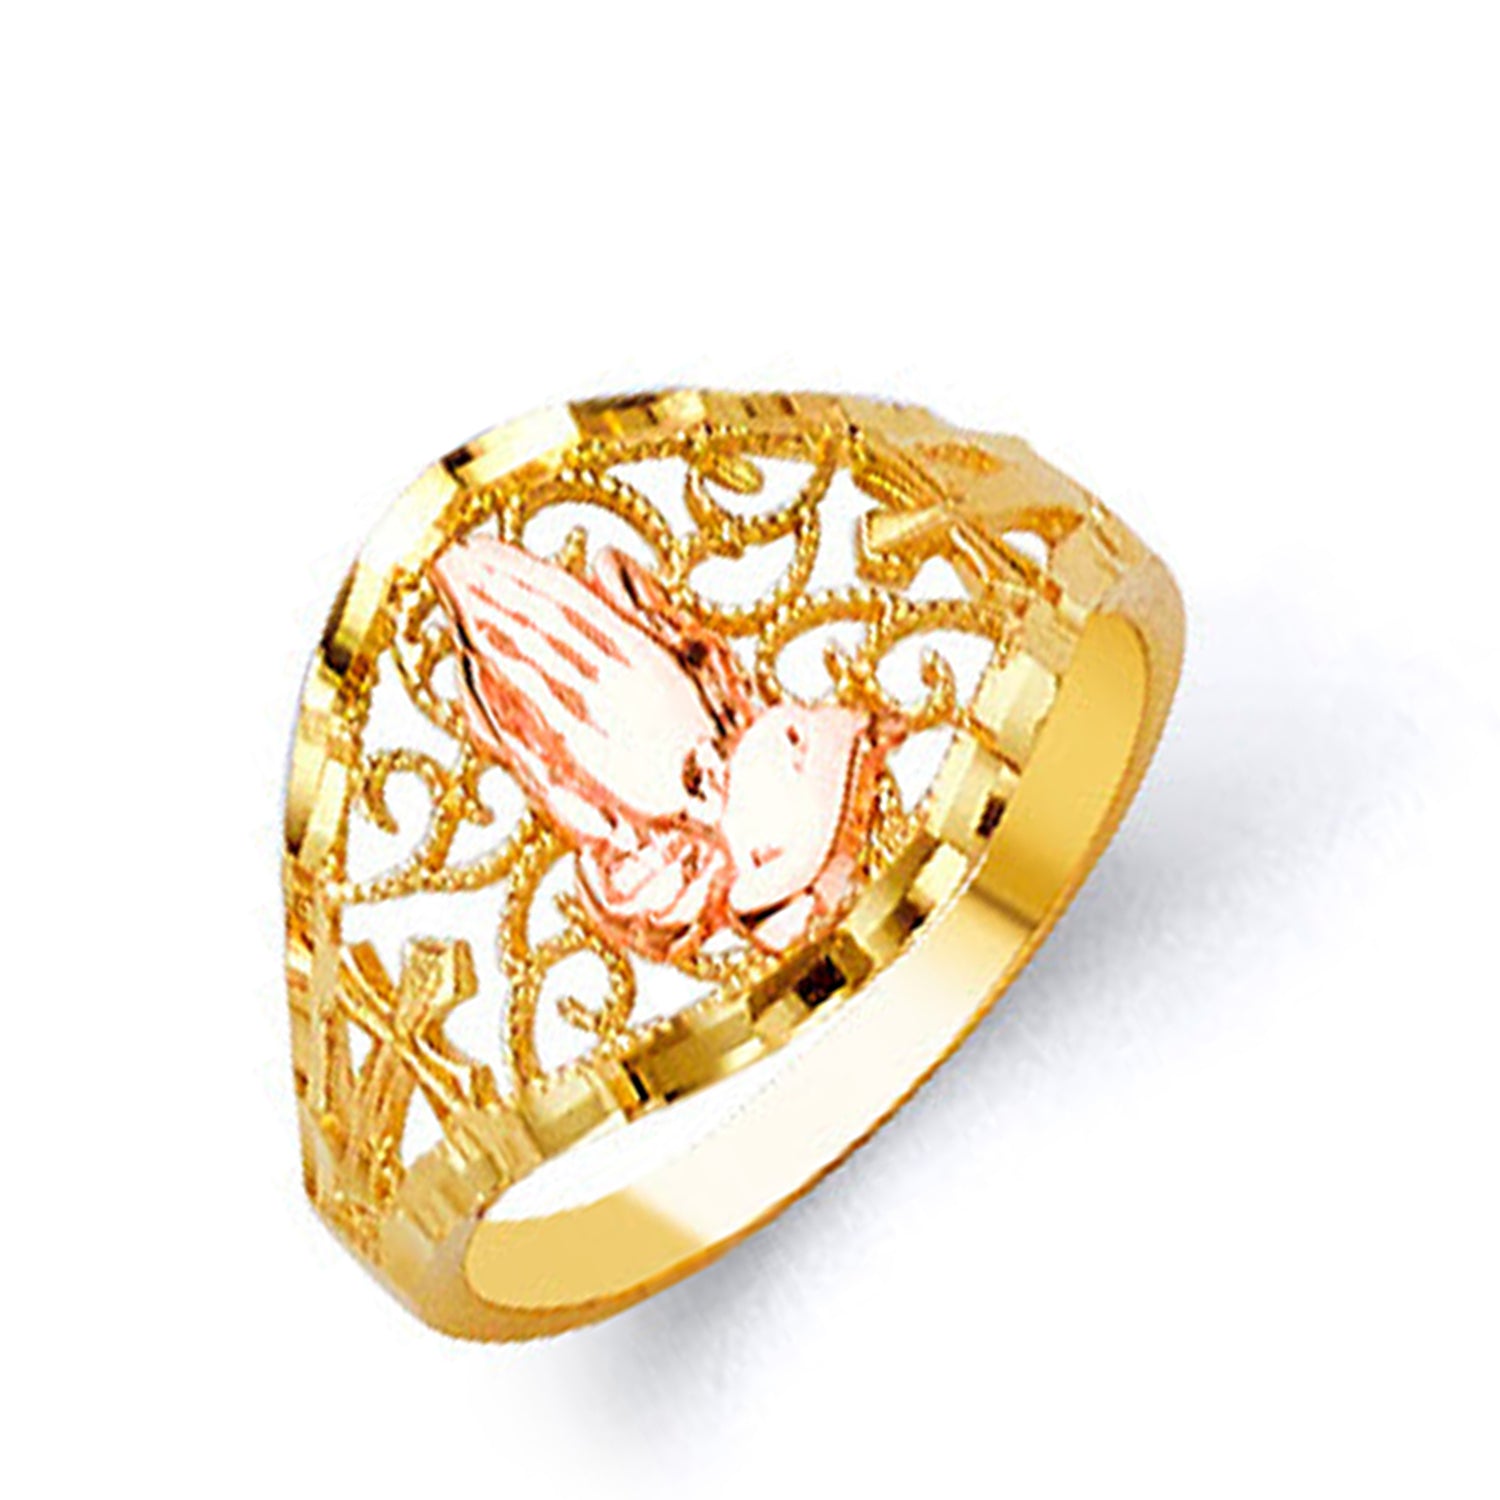 Artistic Foliage Ring in Solid Gold 